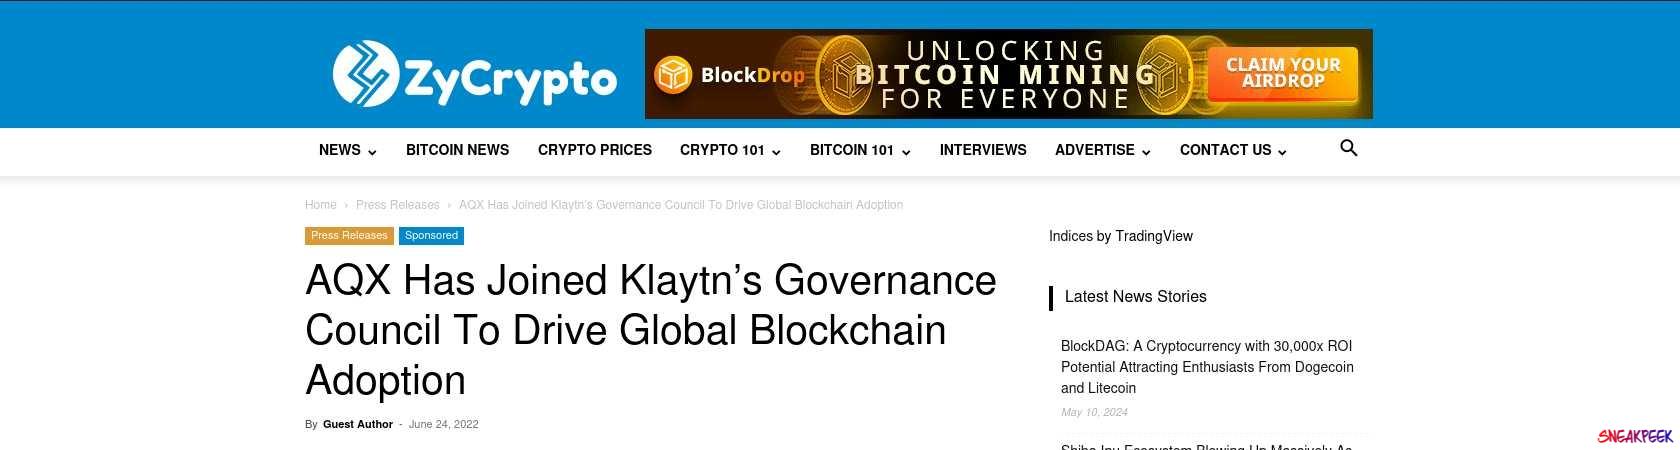 Read the full Article:  ⭲ AQX Has Joined Klaytn’s Governance Council To Drive Global Blockchain Adoption